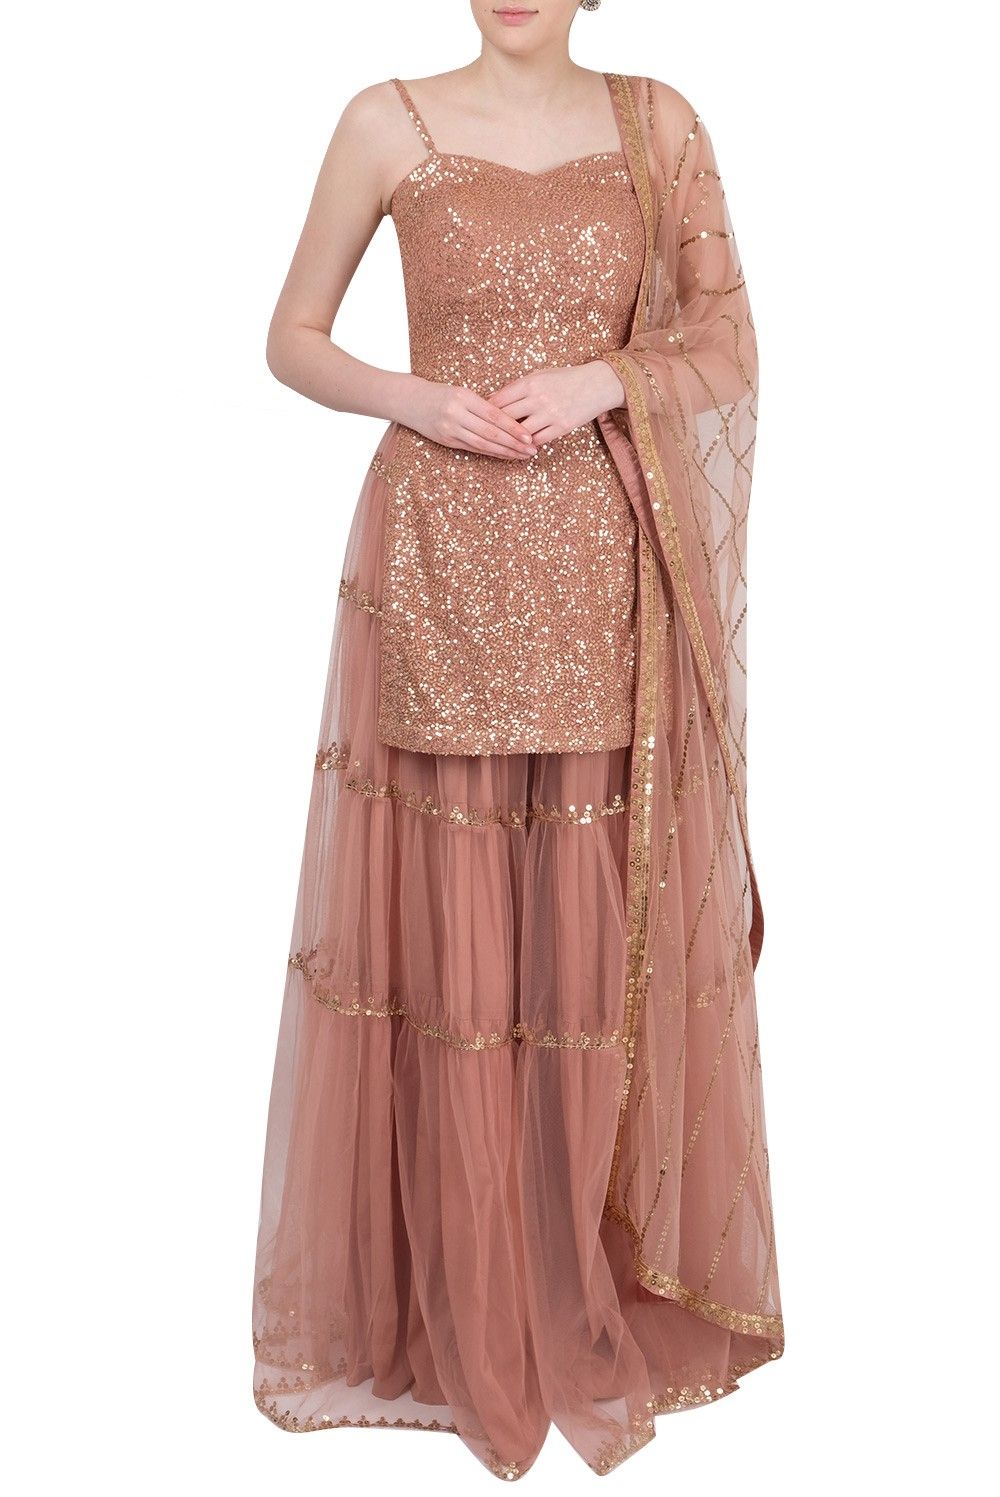 Party Wear Heavy Kurtis For Marriage (18)